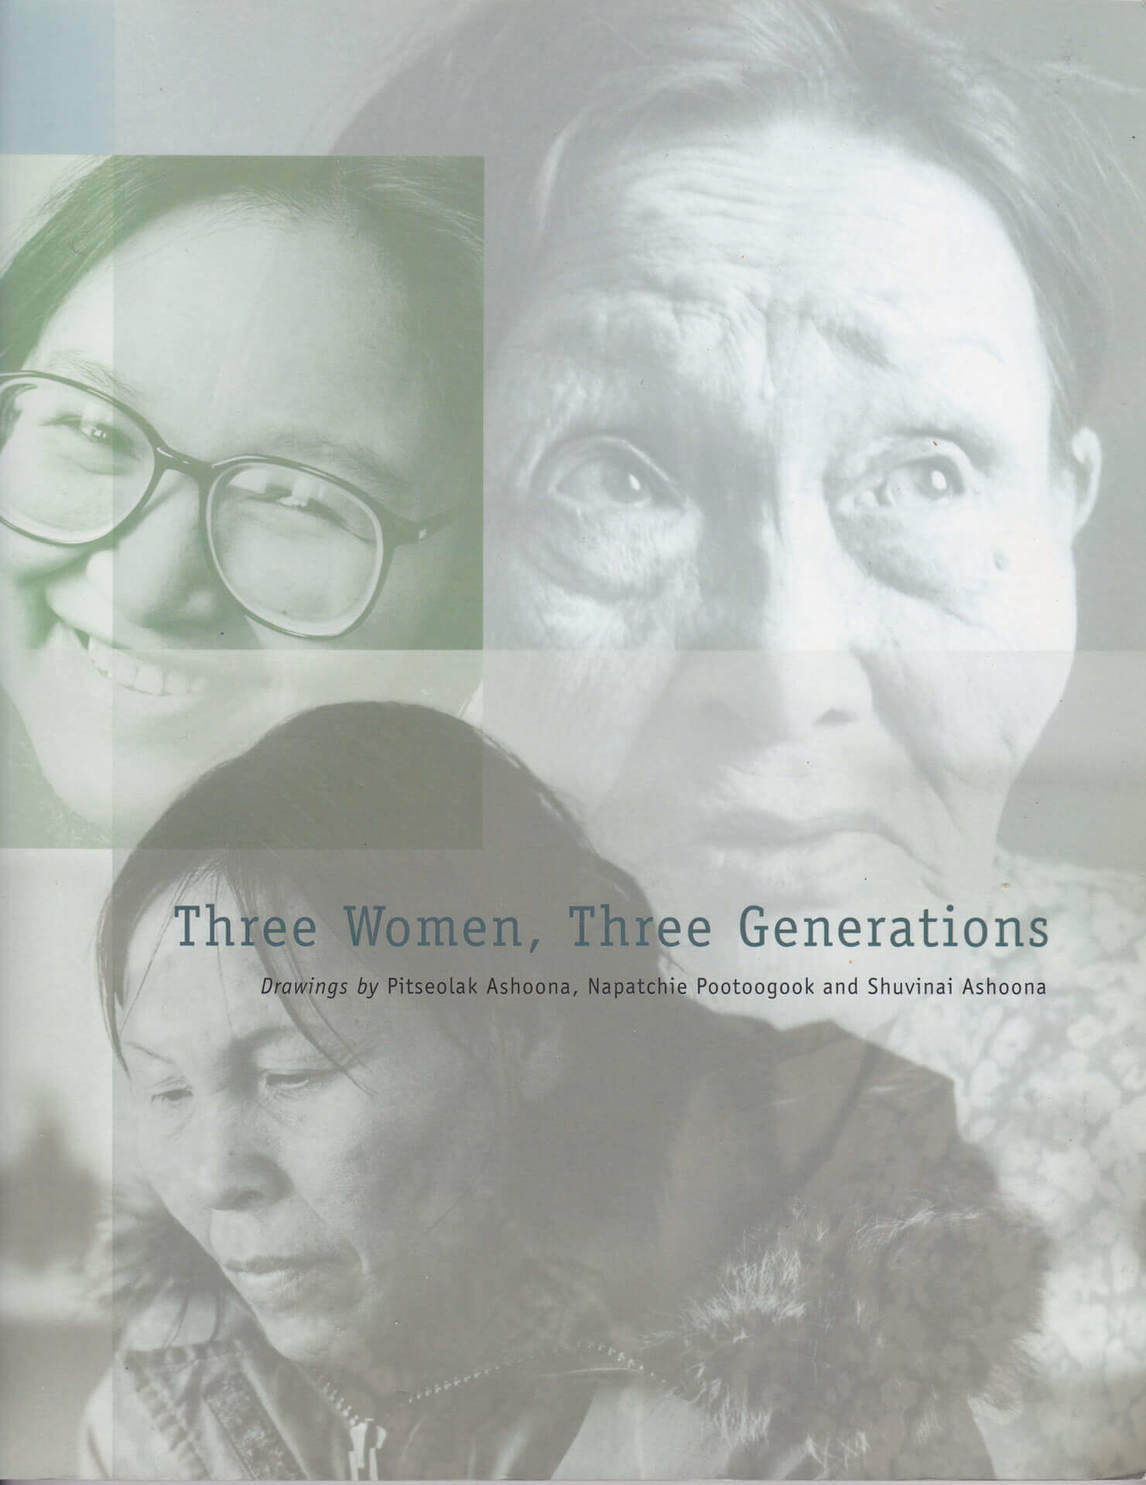 Art Canada Institute, catalogue for the McMichael Canadian Art Collection exhibition Three Women, Three Generations: Drawings by Pitseolak Ashoona, Napatchie Pootoogook and Shuvinai Ashoona